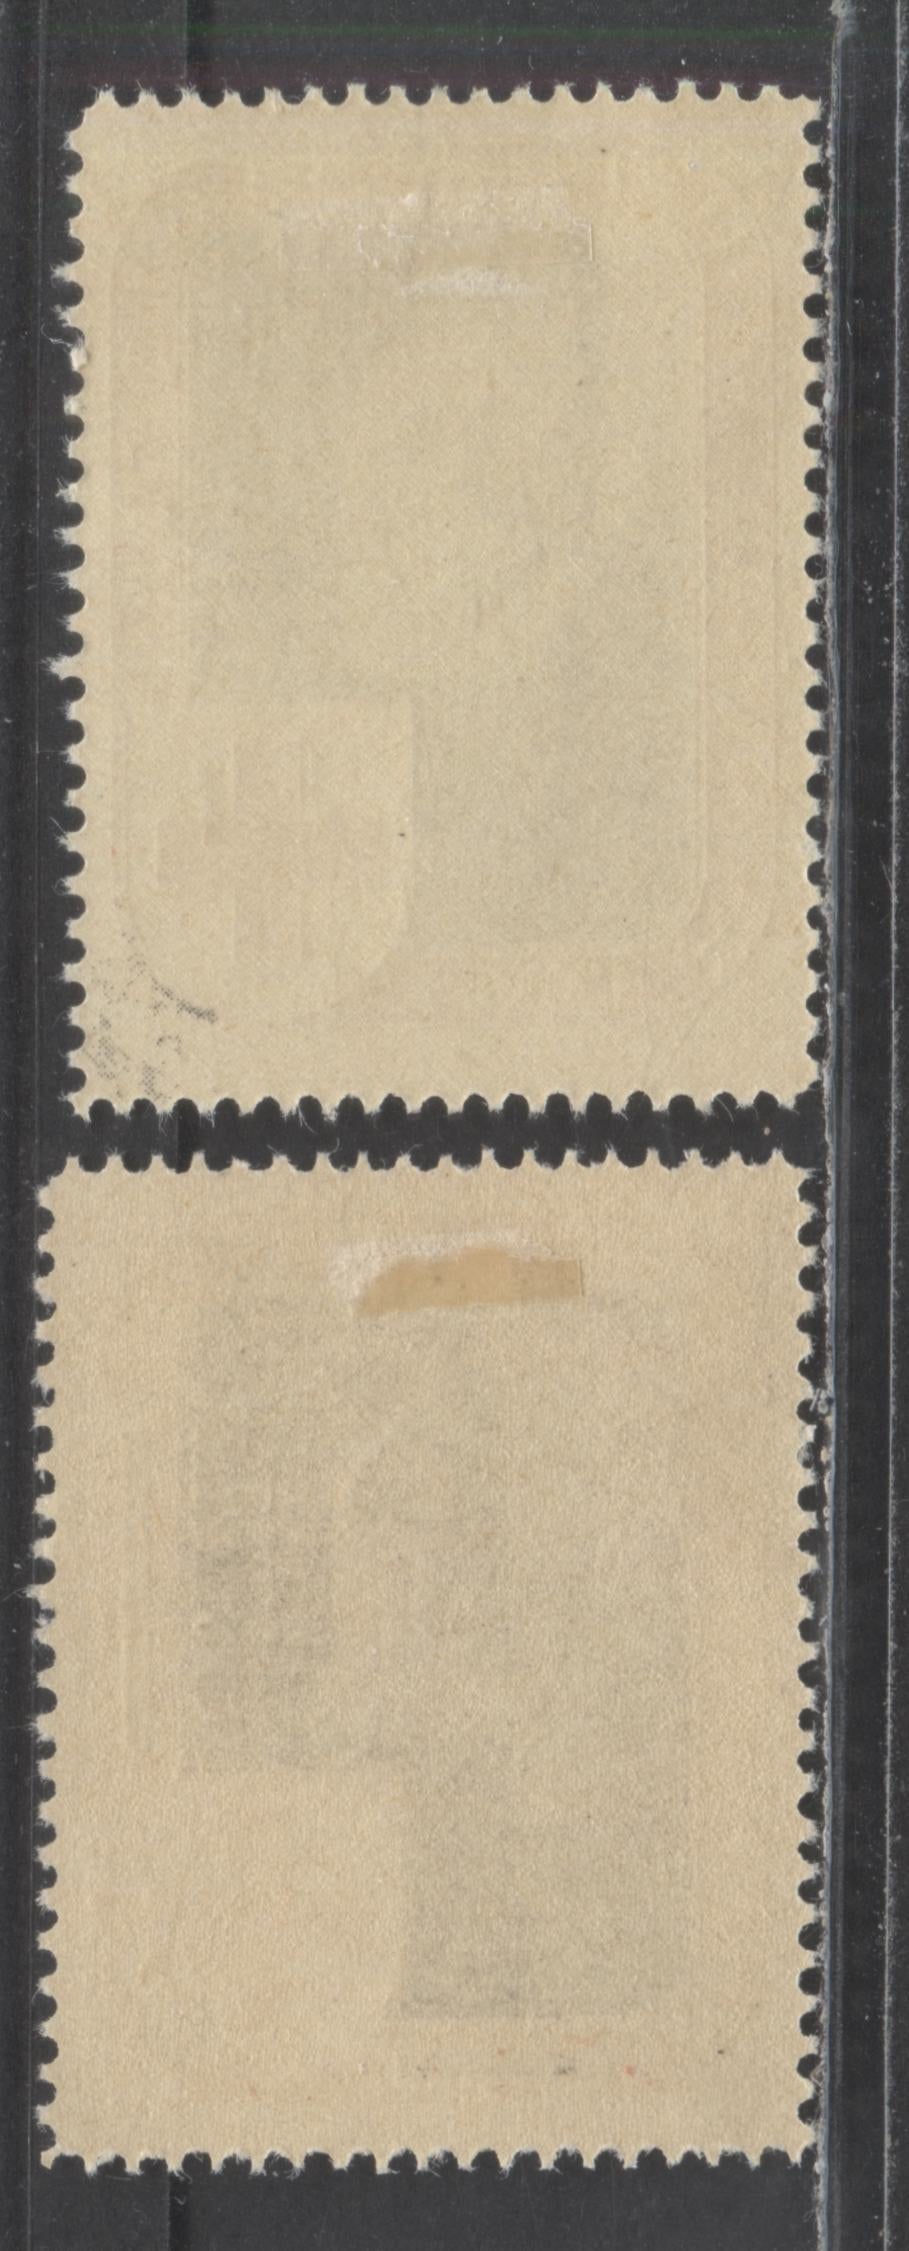 Lot 7 Switzerland SC#Unlisted  1941 - 1942 MSA Luzern, MSA Interlaken, Perf With One Overprint, 2 VFOG Examples, Click on Listing to See ALL Pictures, Estimated Value $5 USD